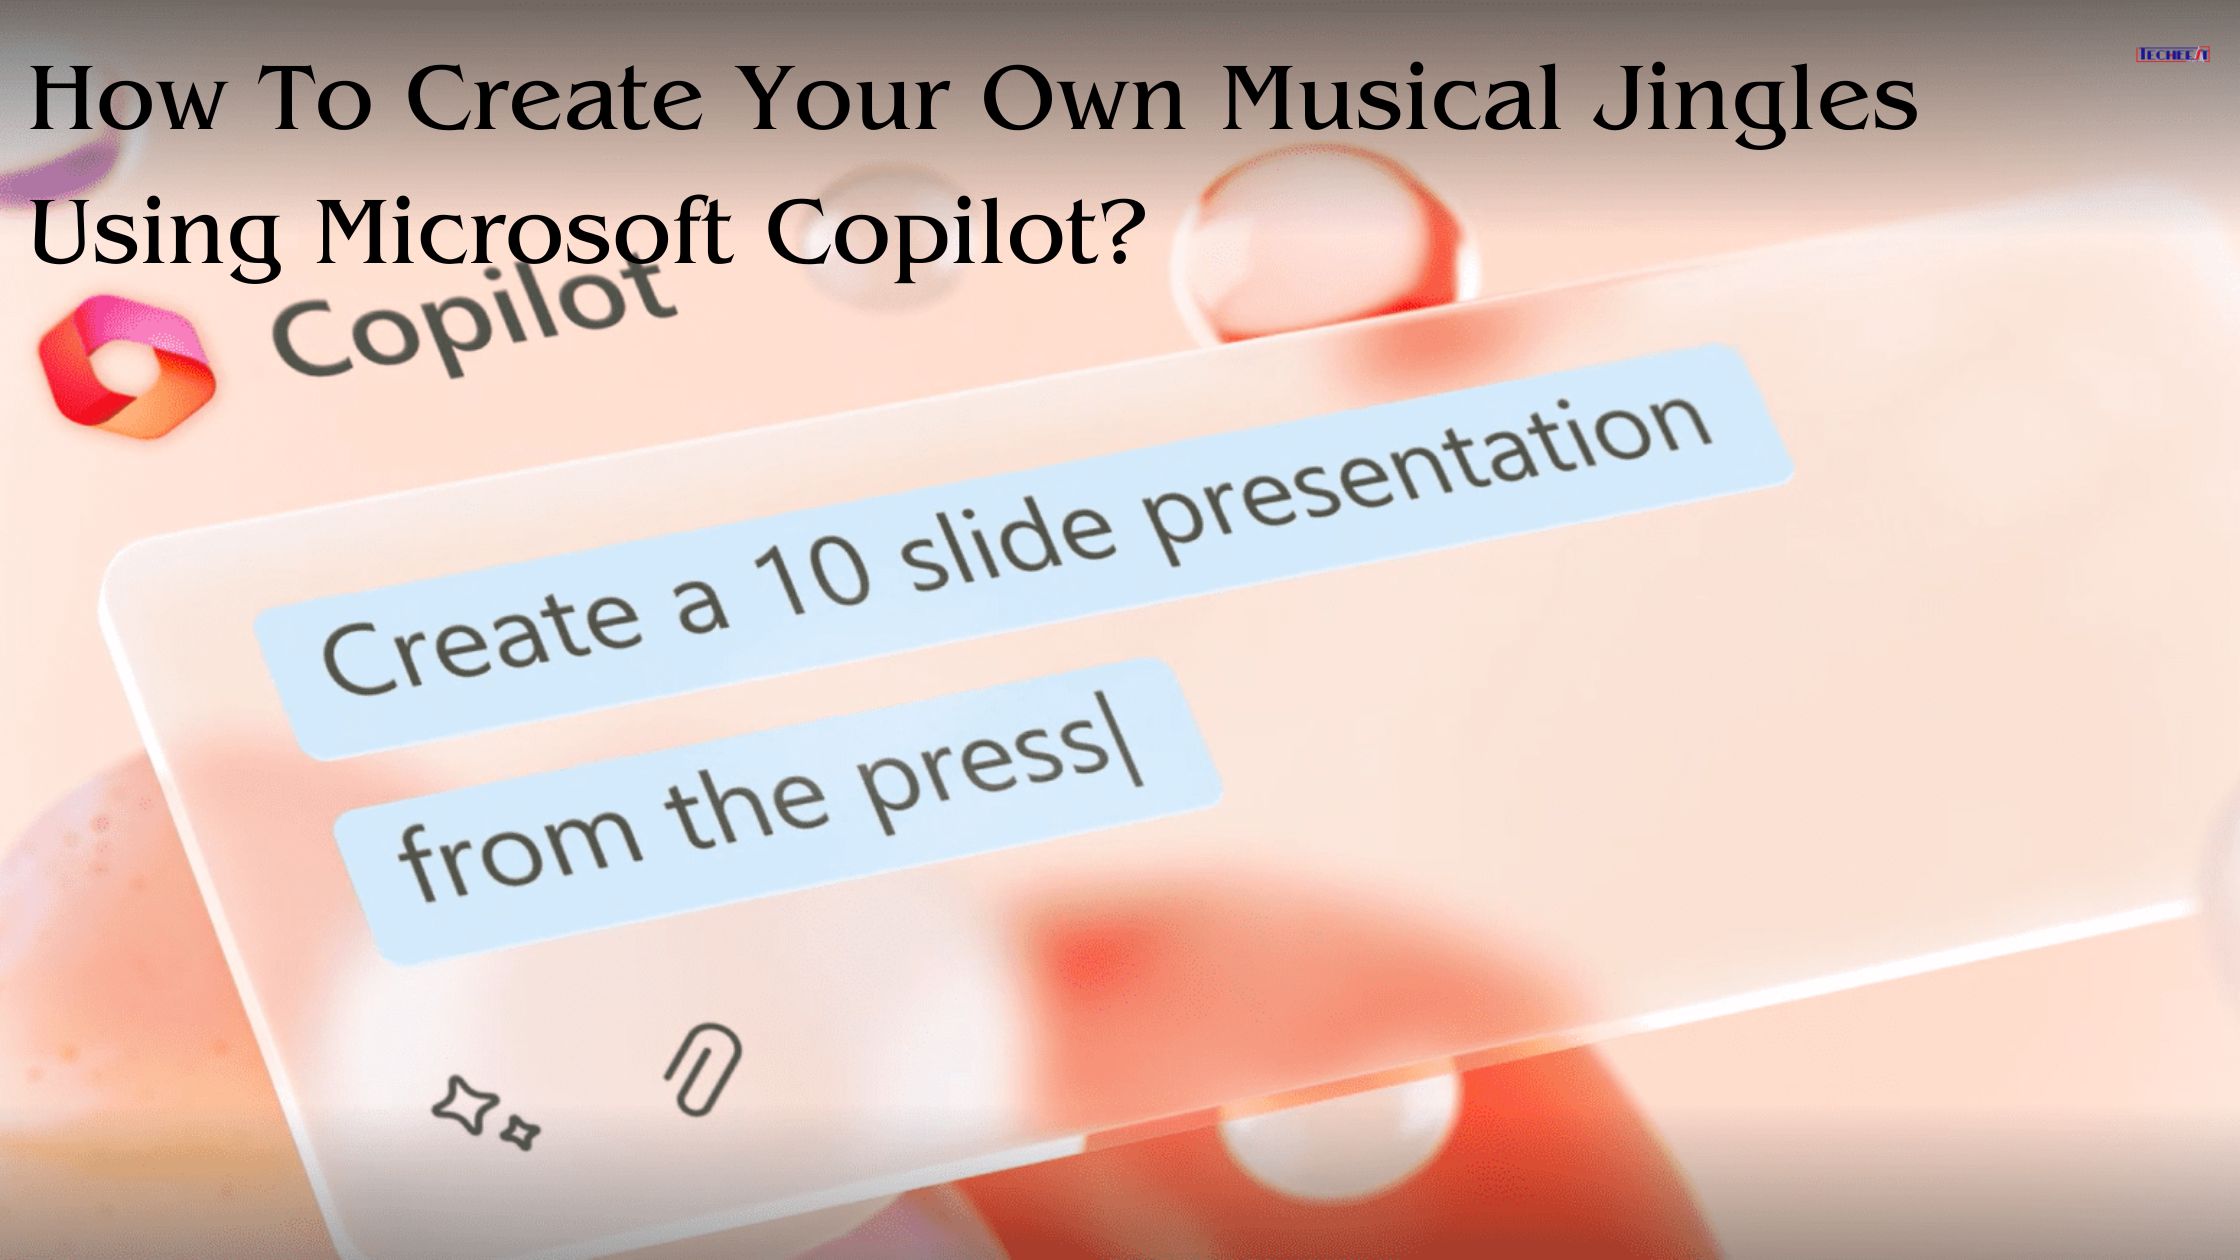 How To Create Your Own Musical Jingles Using Microsoft Copilot?